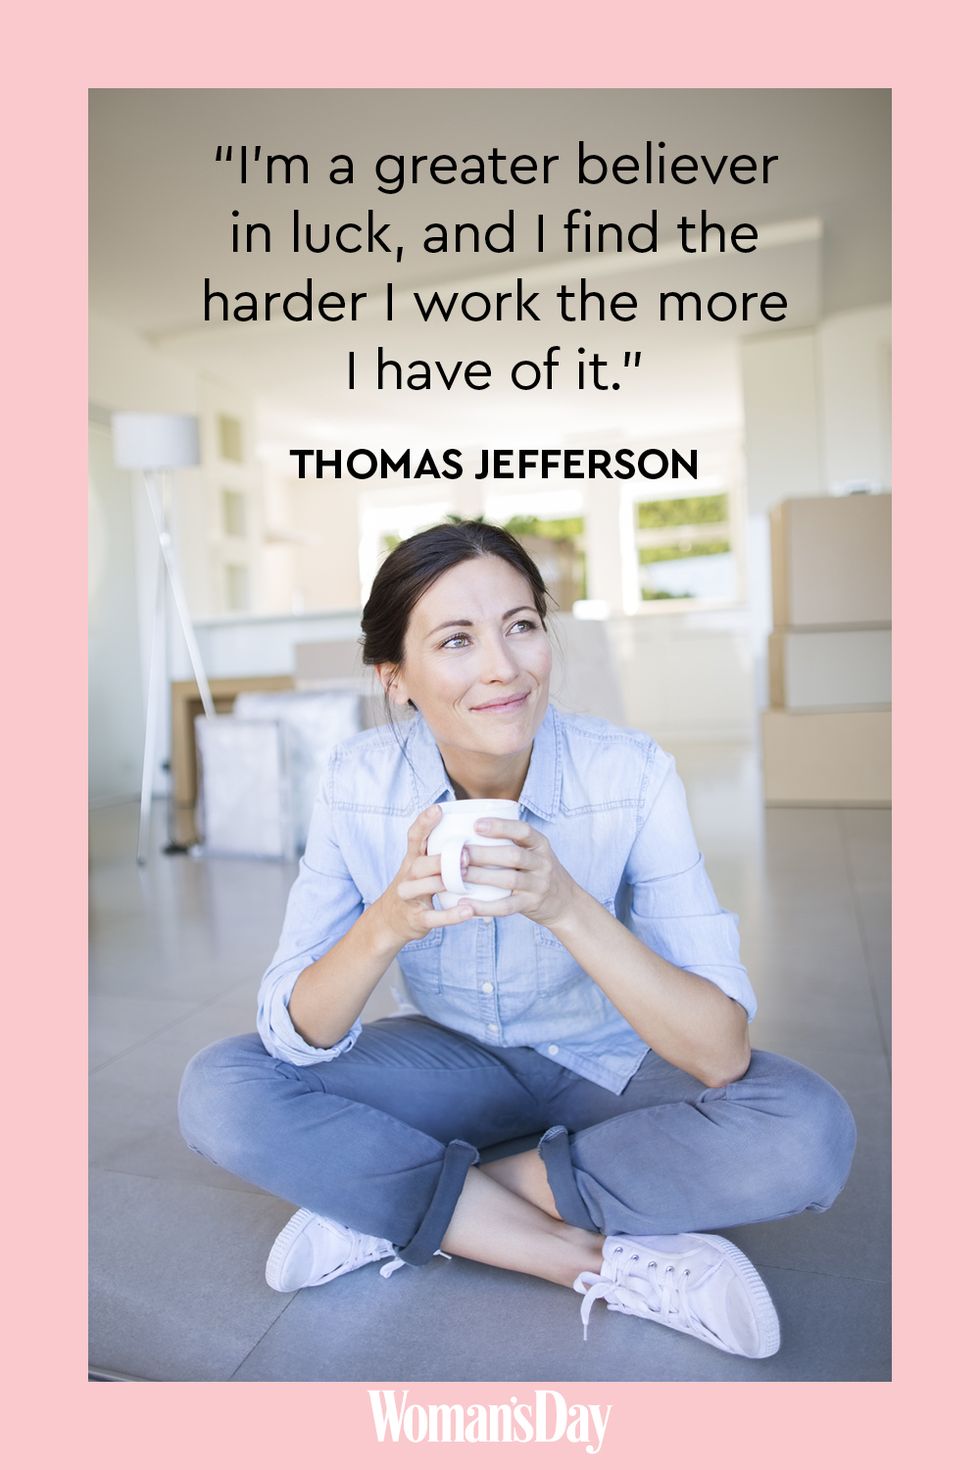 27 Hard Work Quotes - Famous Quotes About Success and Hard Work